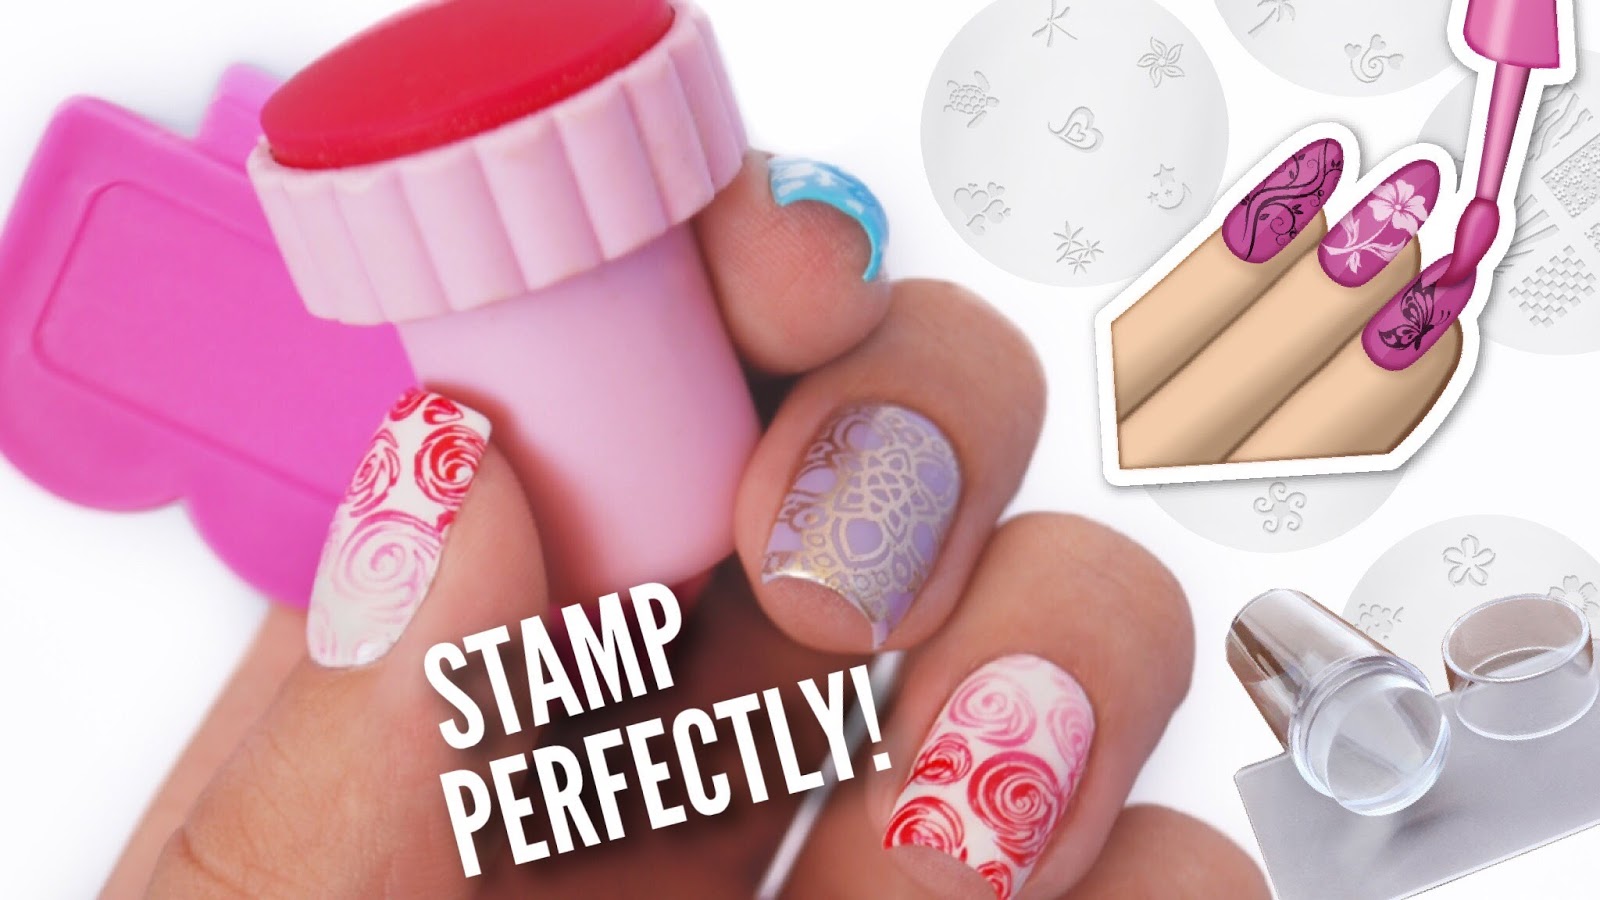 7. Net Nail Art Tutorial with Stamping Plate - wide 3